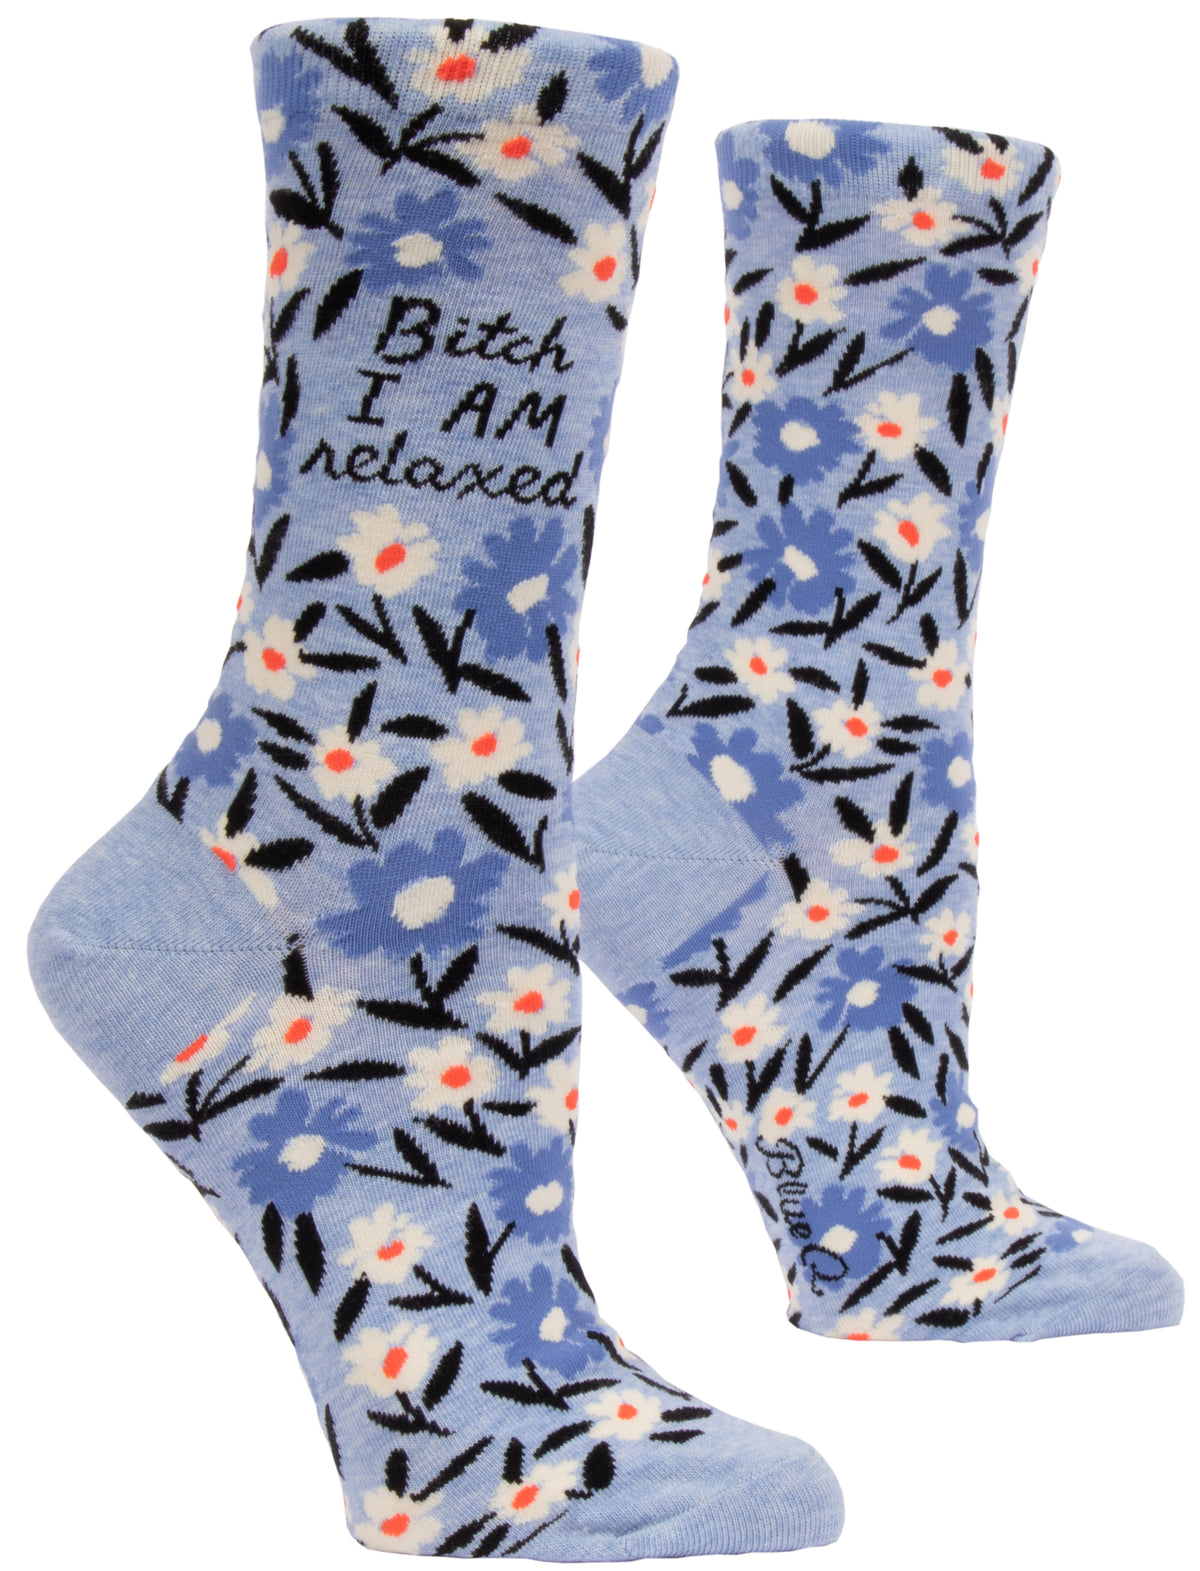 Bitch, I am Relaxed Crew Socks